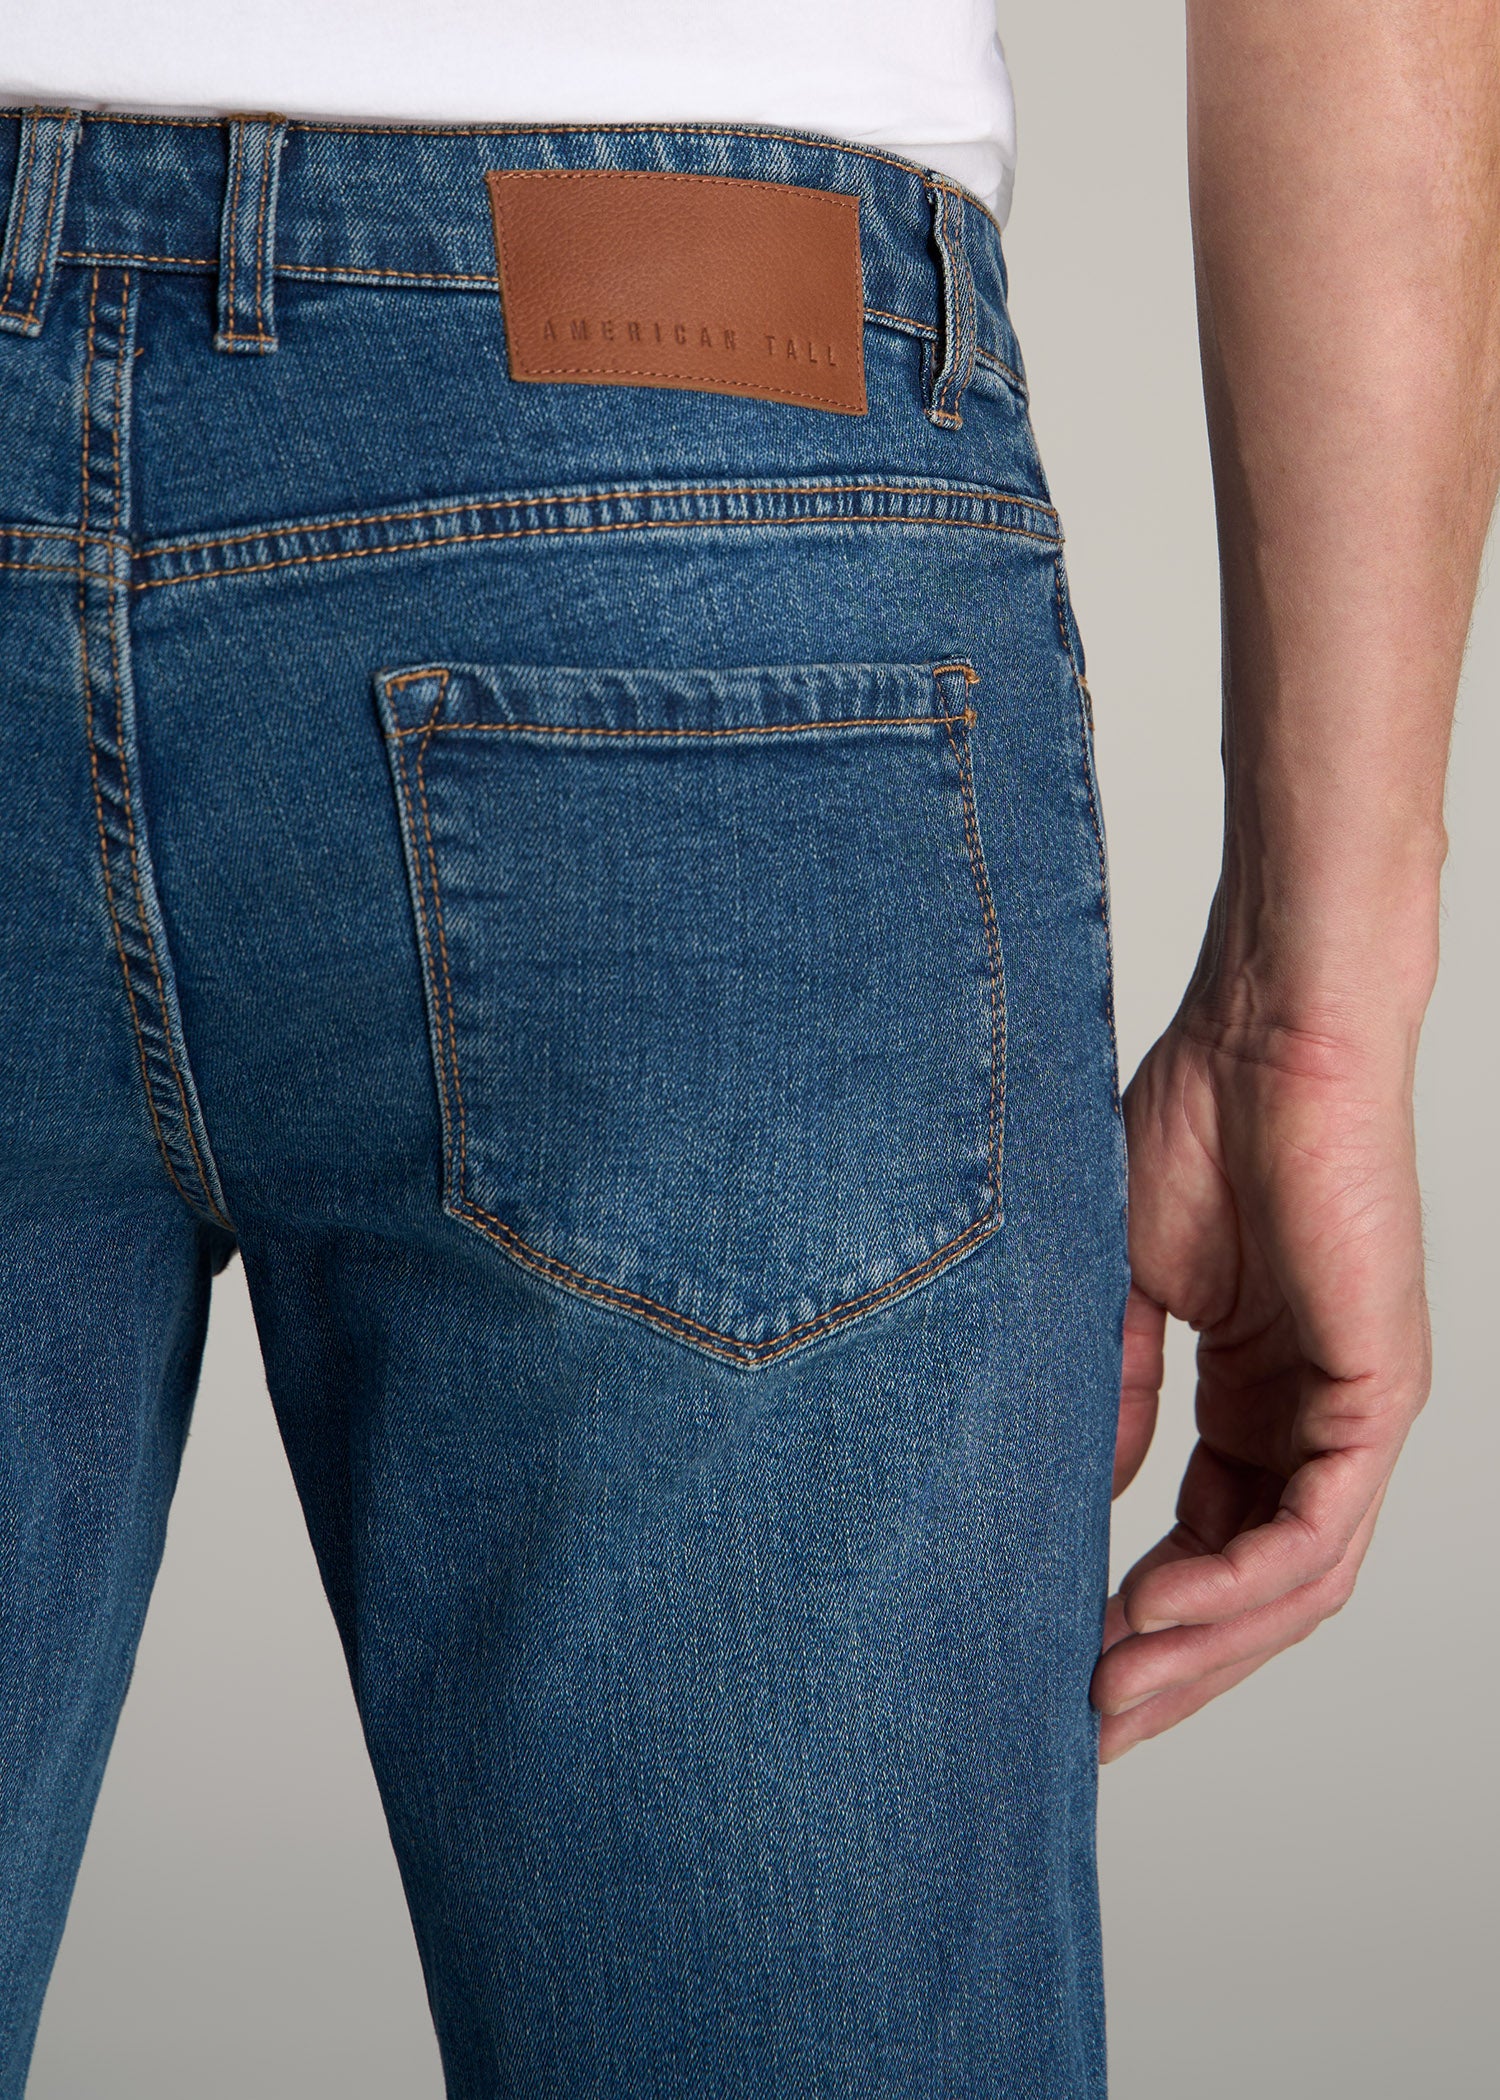 Carman Tapered Jeans For Tall Men Worn Blue | American Tall